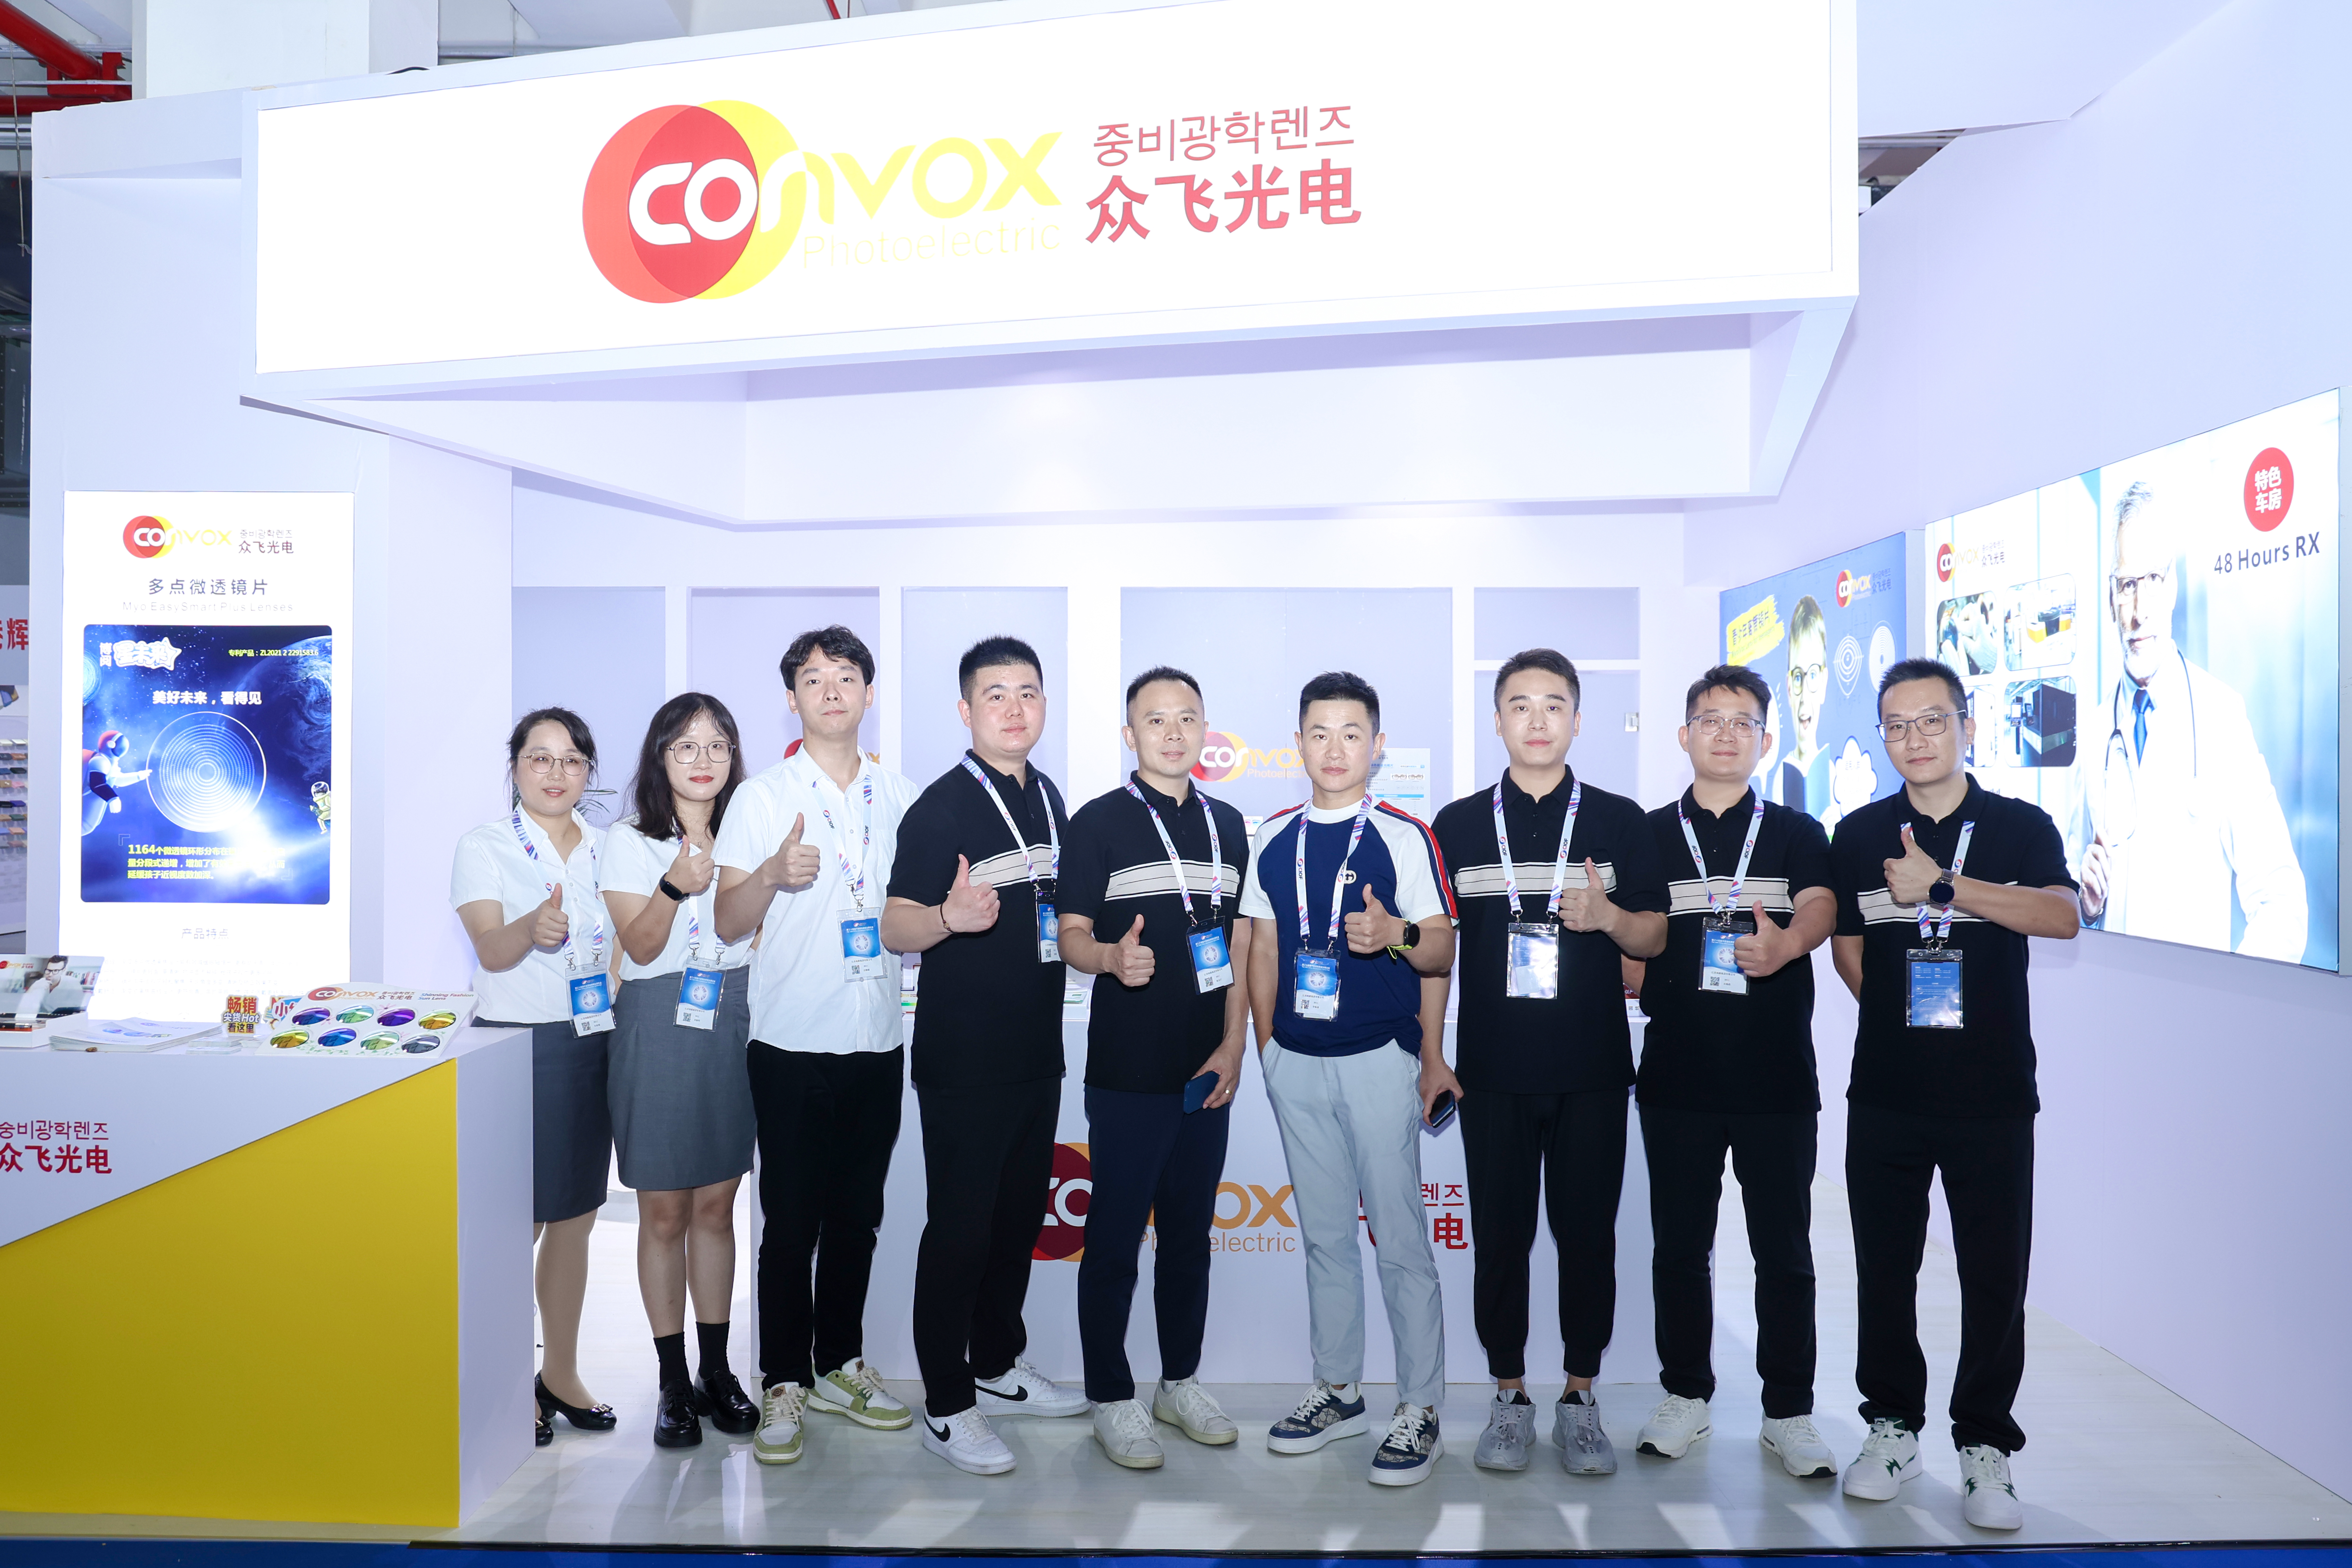 2023 Beijing Optical exhibition ended successfully